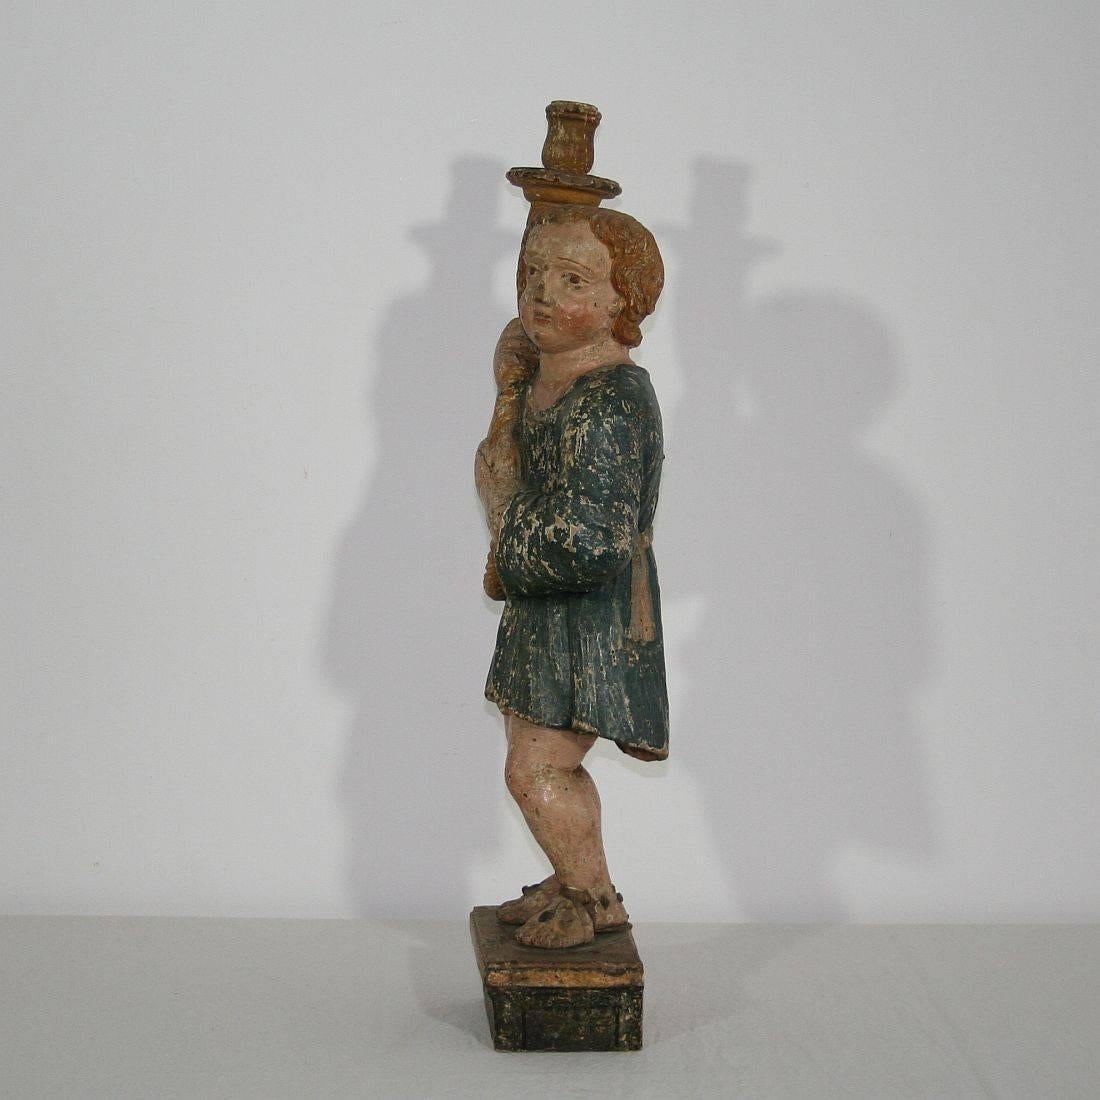 Painted 17th Century, Early Baroque Carved Wooden Angel with a Candleholder